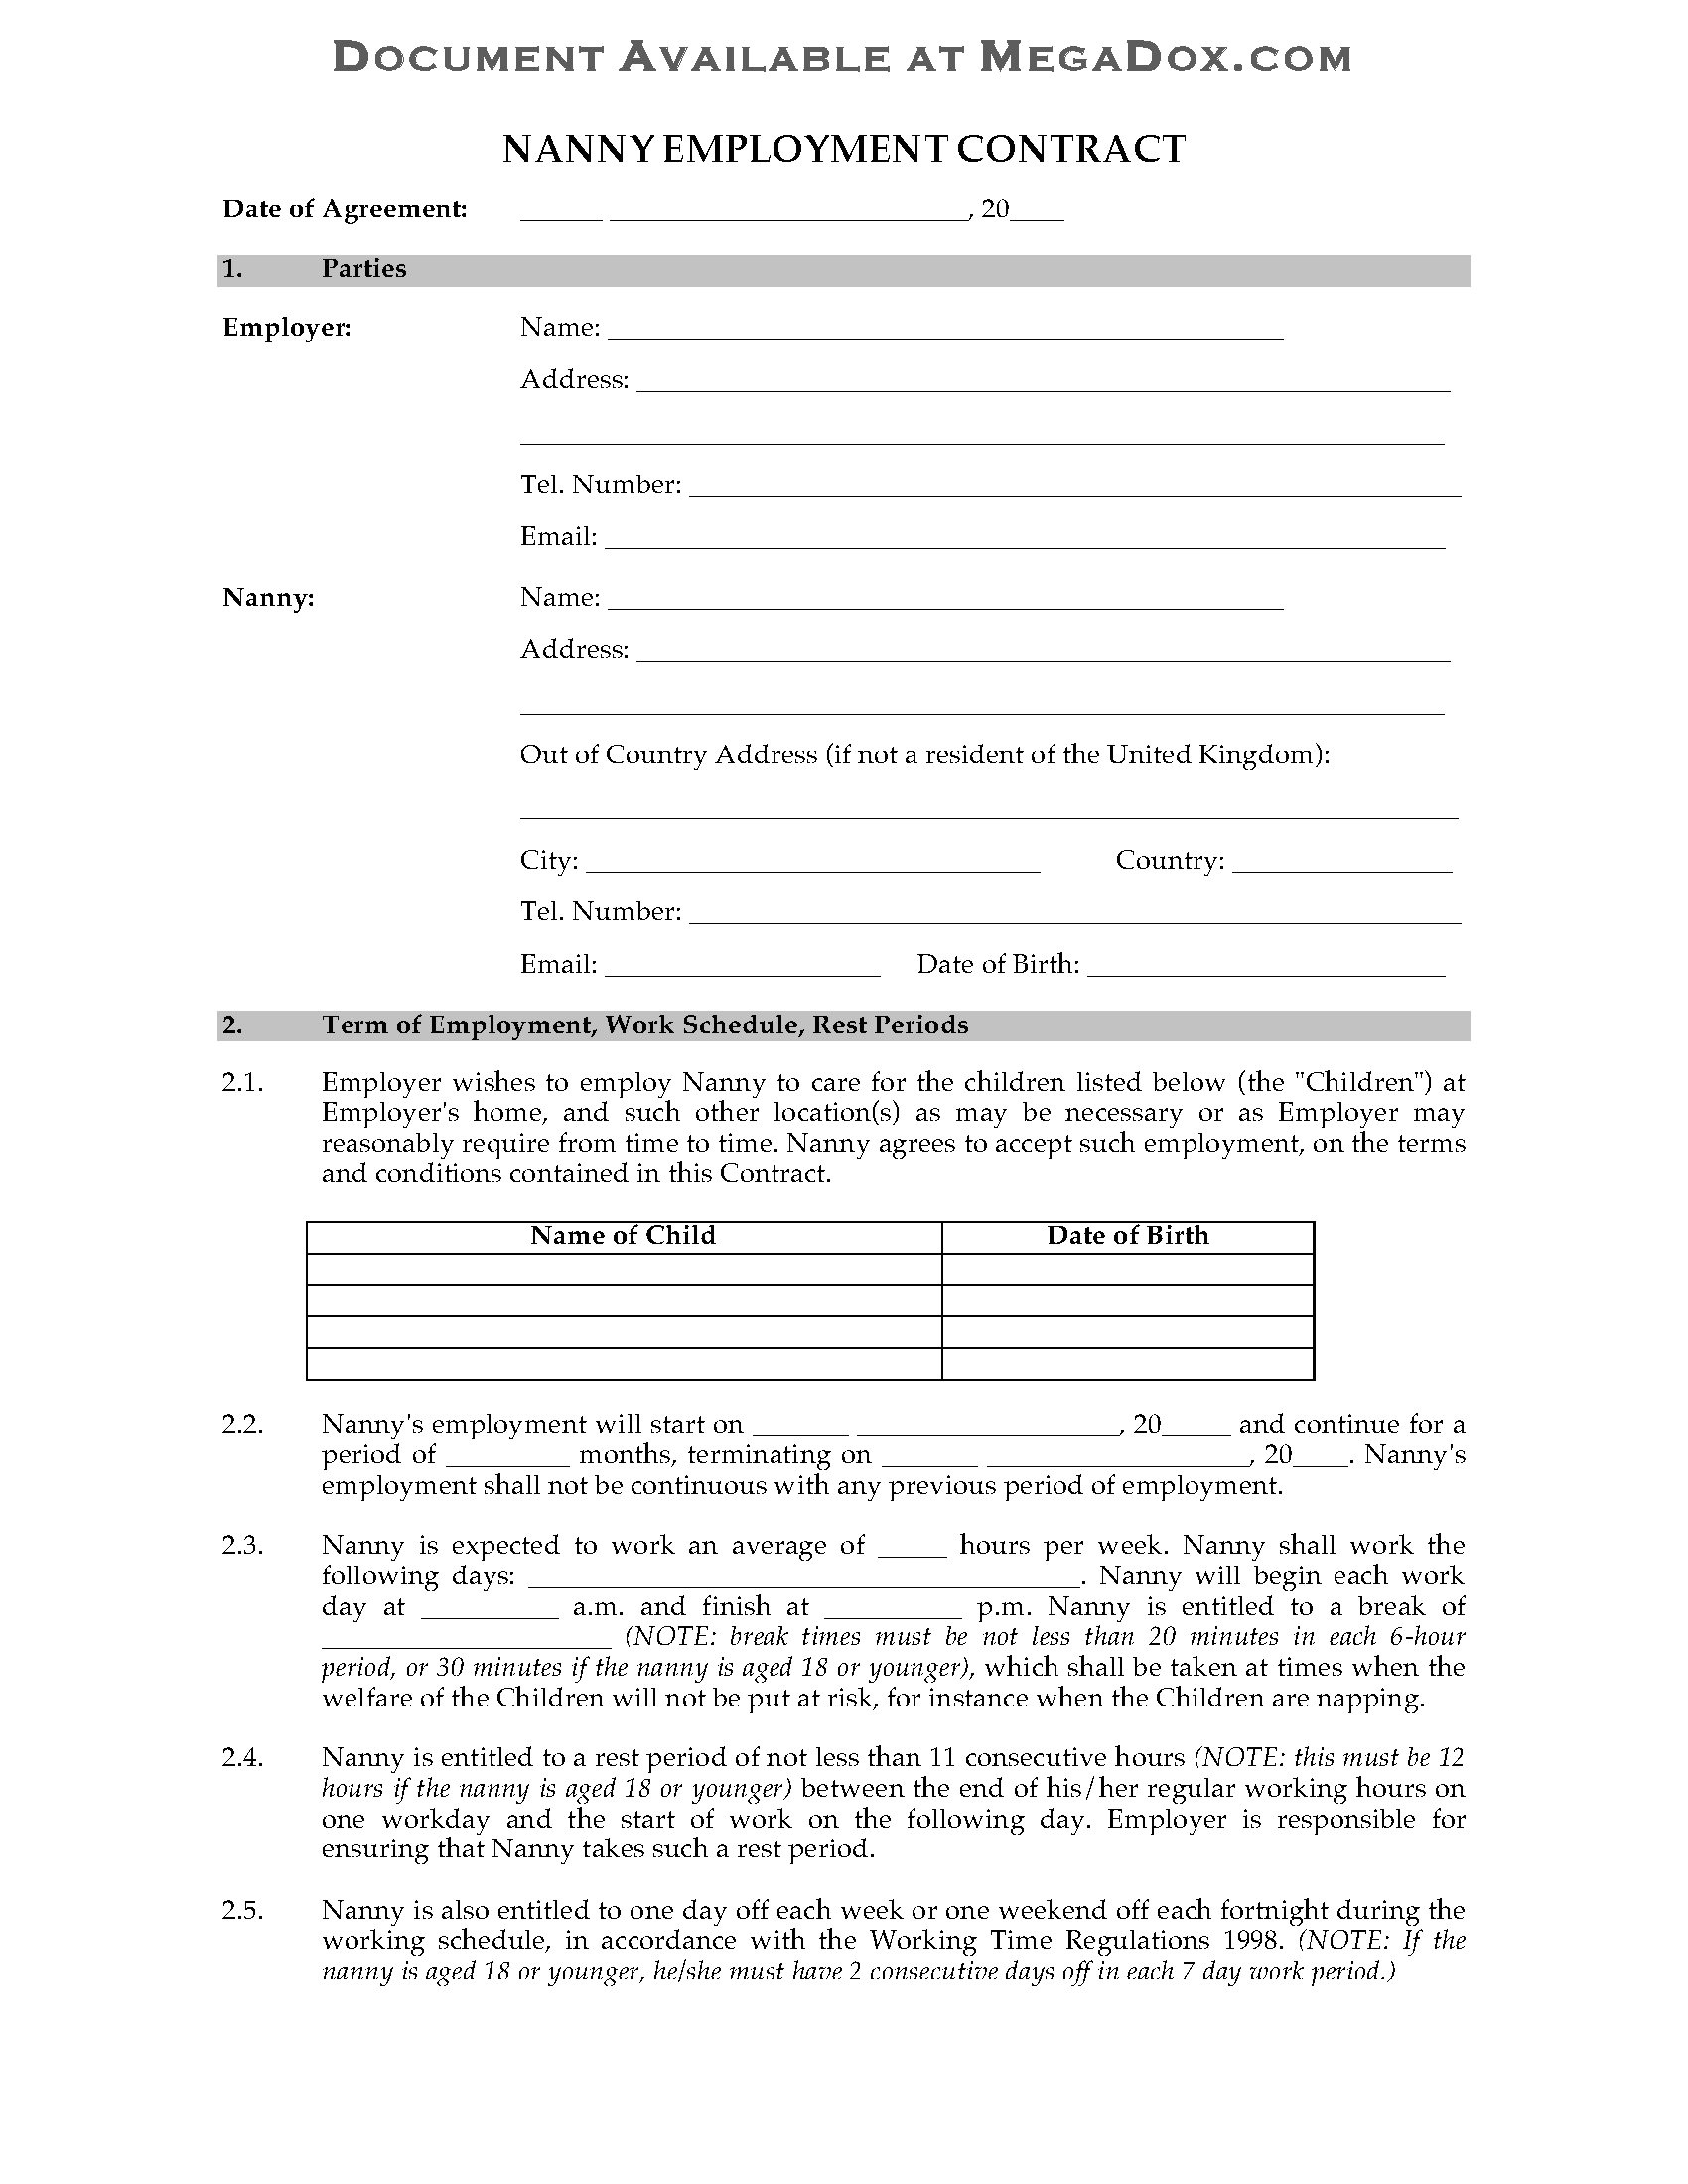 uk nanny employment contract